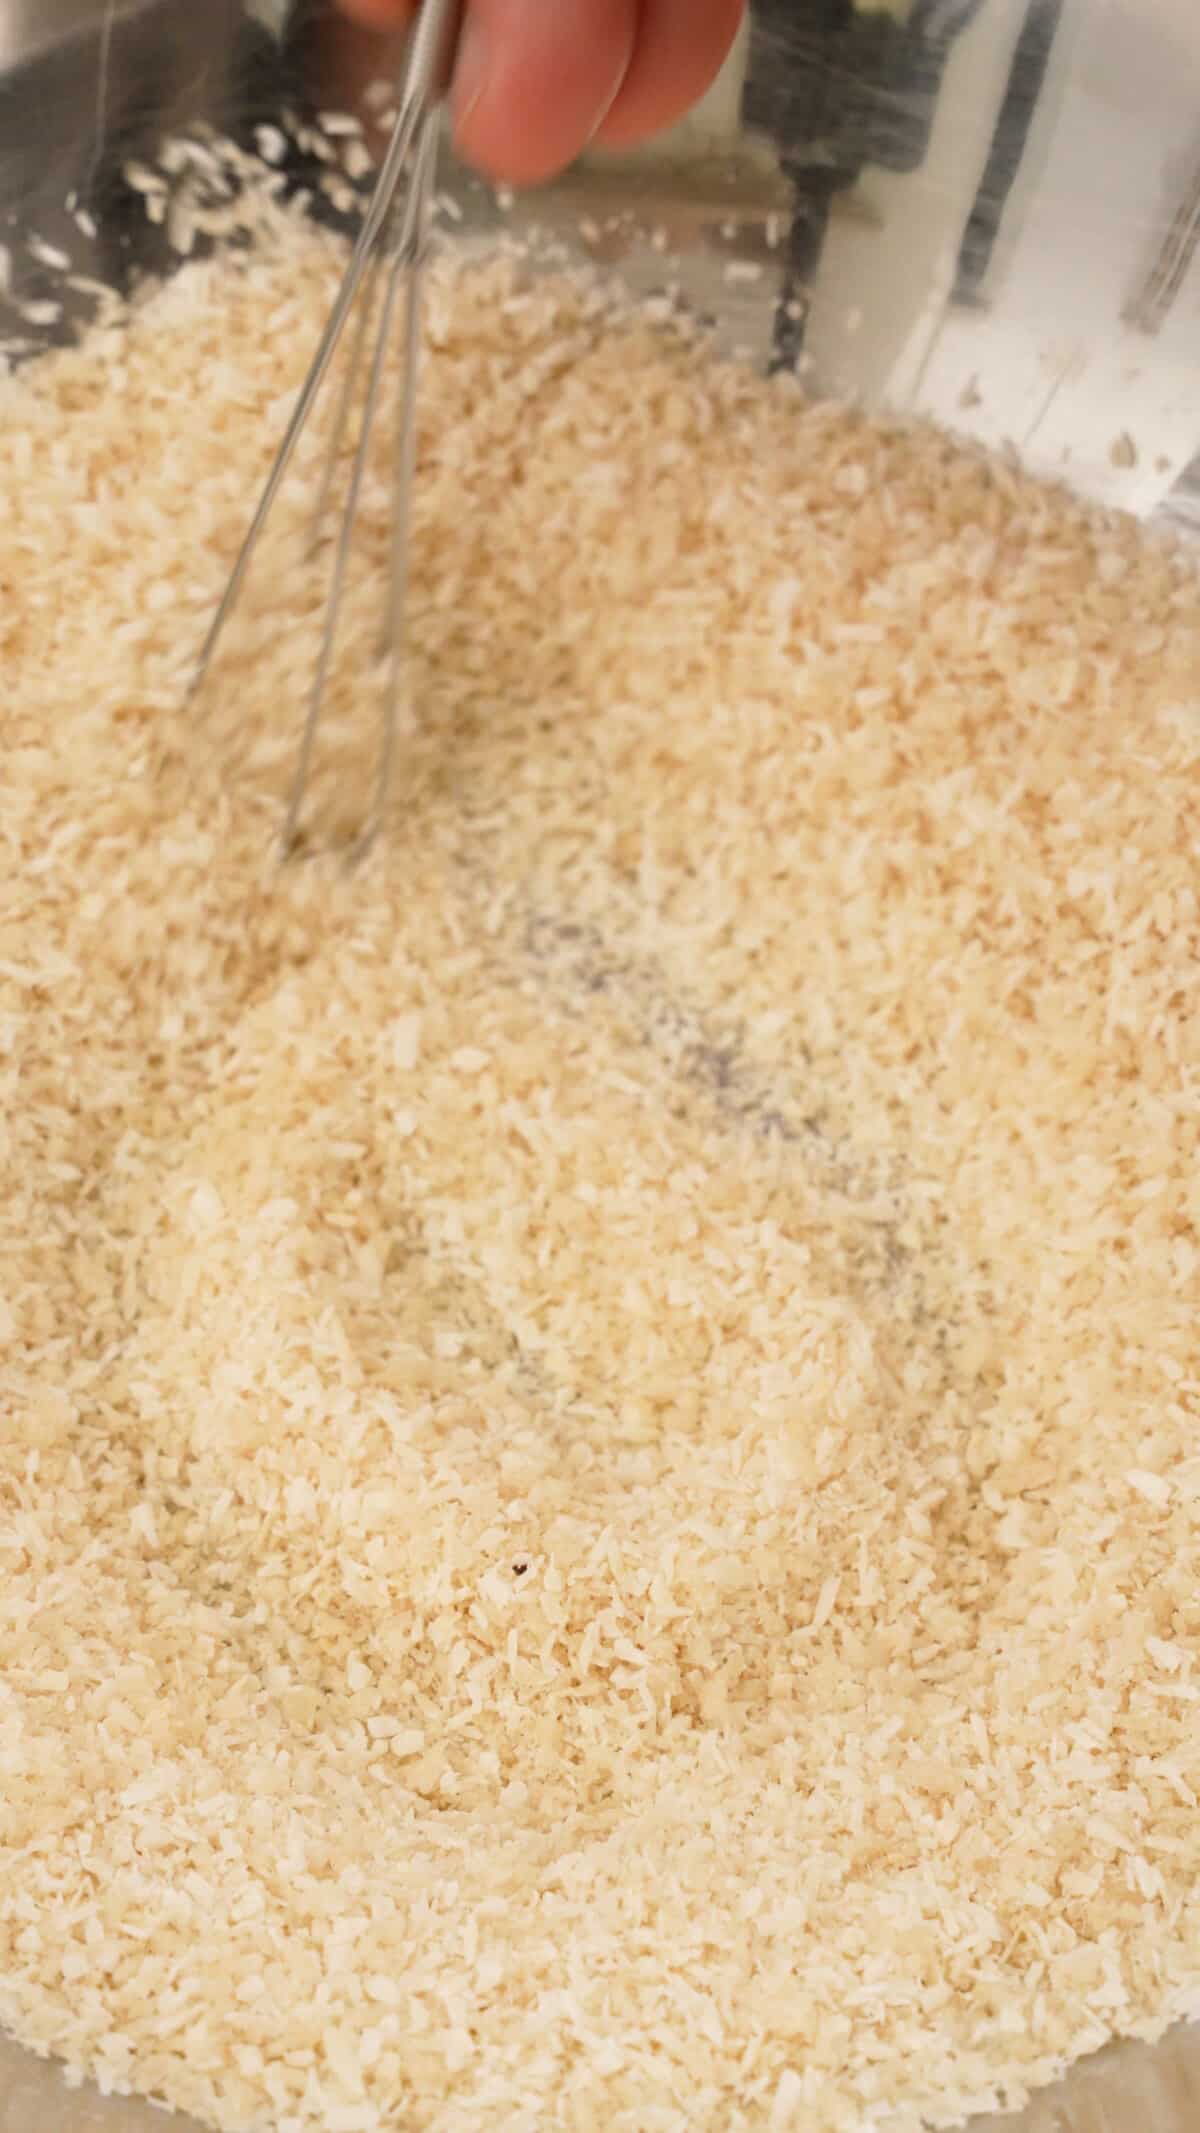 Panko breadcrumbs and coconut flakes being mixed together in a bowl.